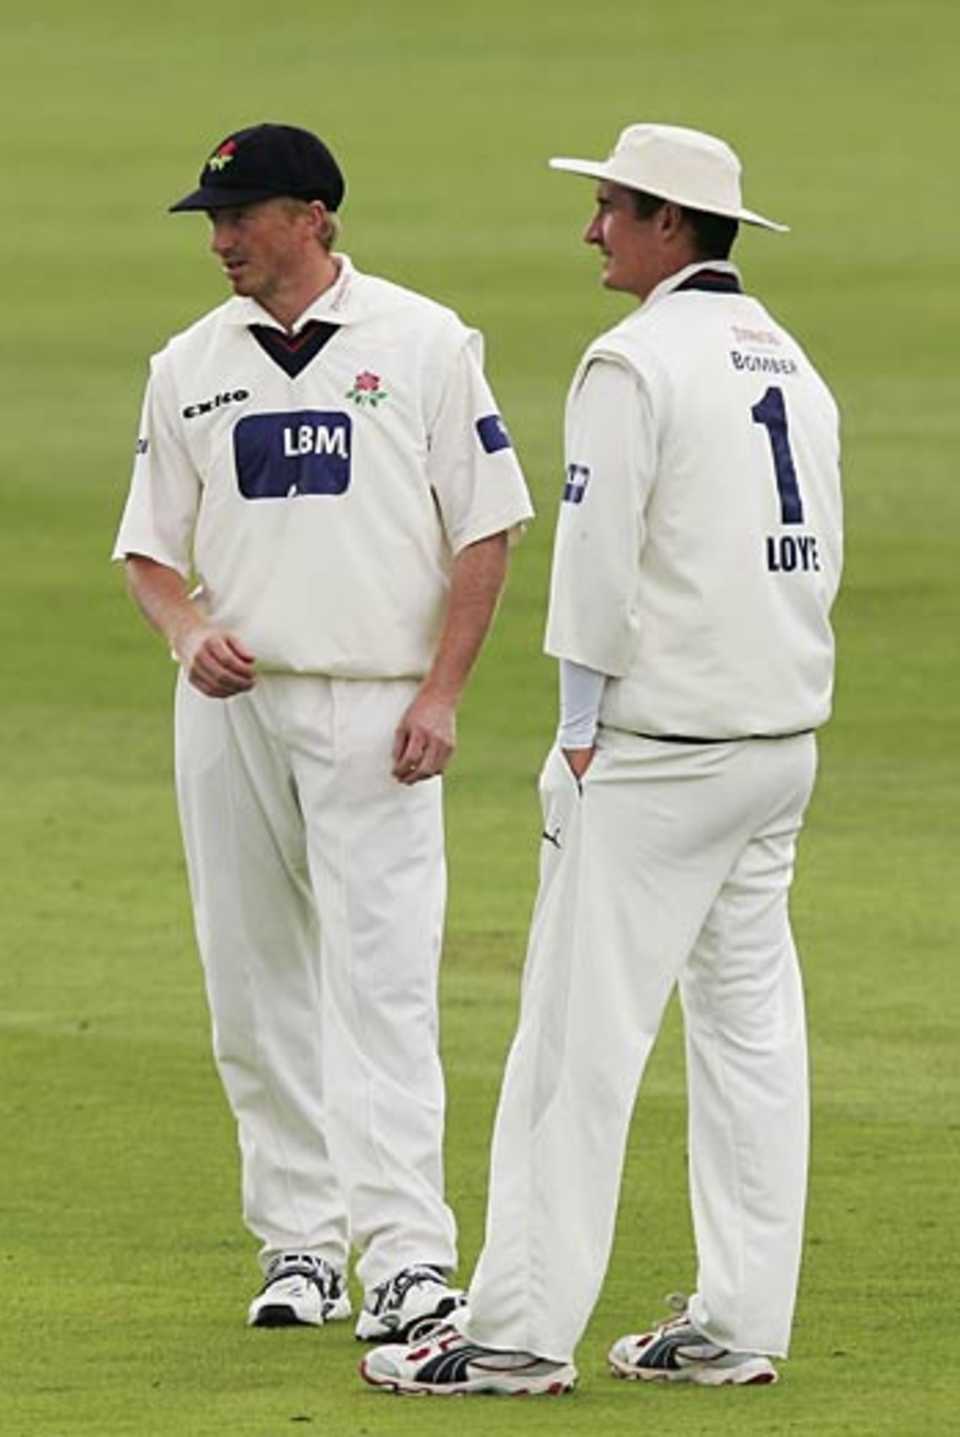 Glen Chapple and Mal Loye were both named in England's Champions Trophy 30